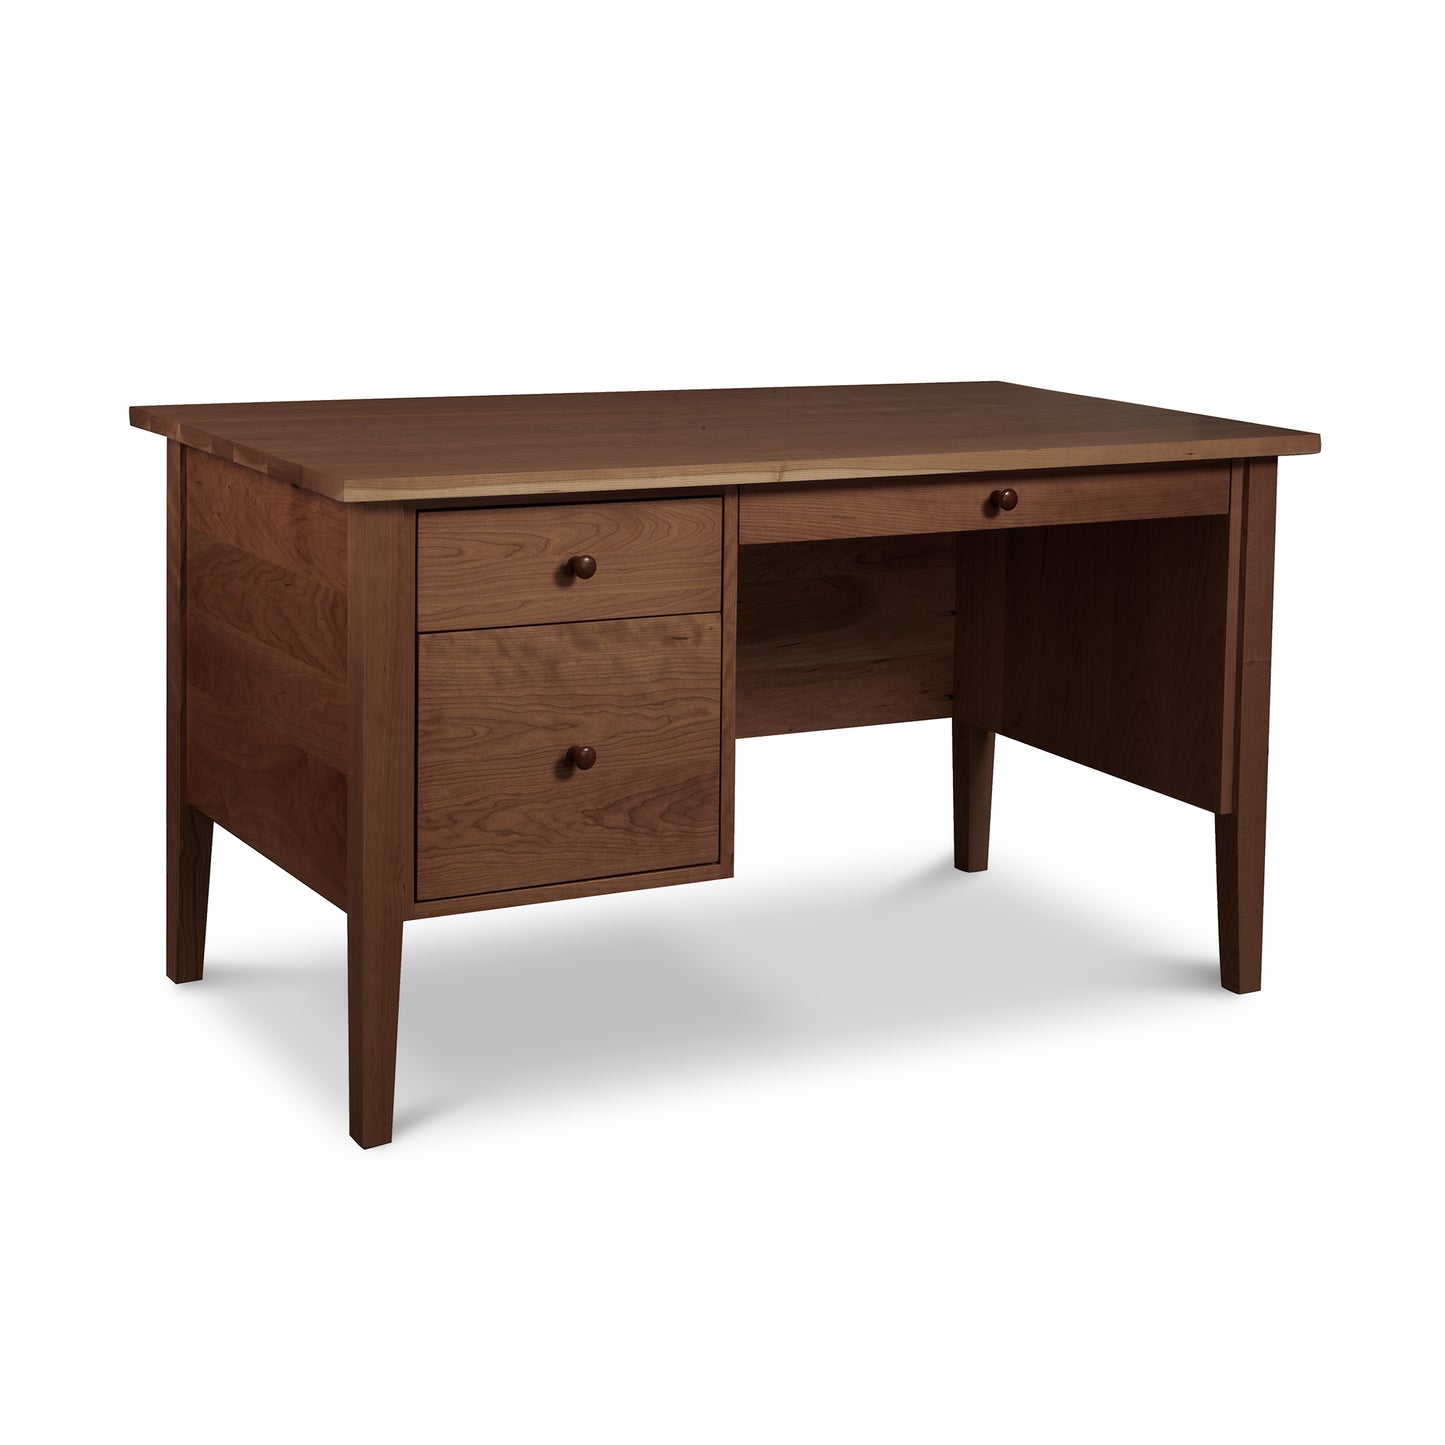 A Small Wood Executive Desk with storage drawers made of solid wood by Lyndon Furniture.